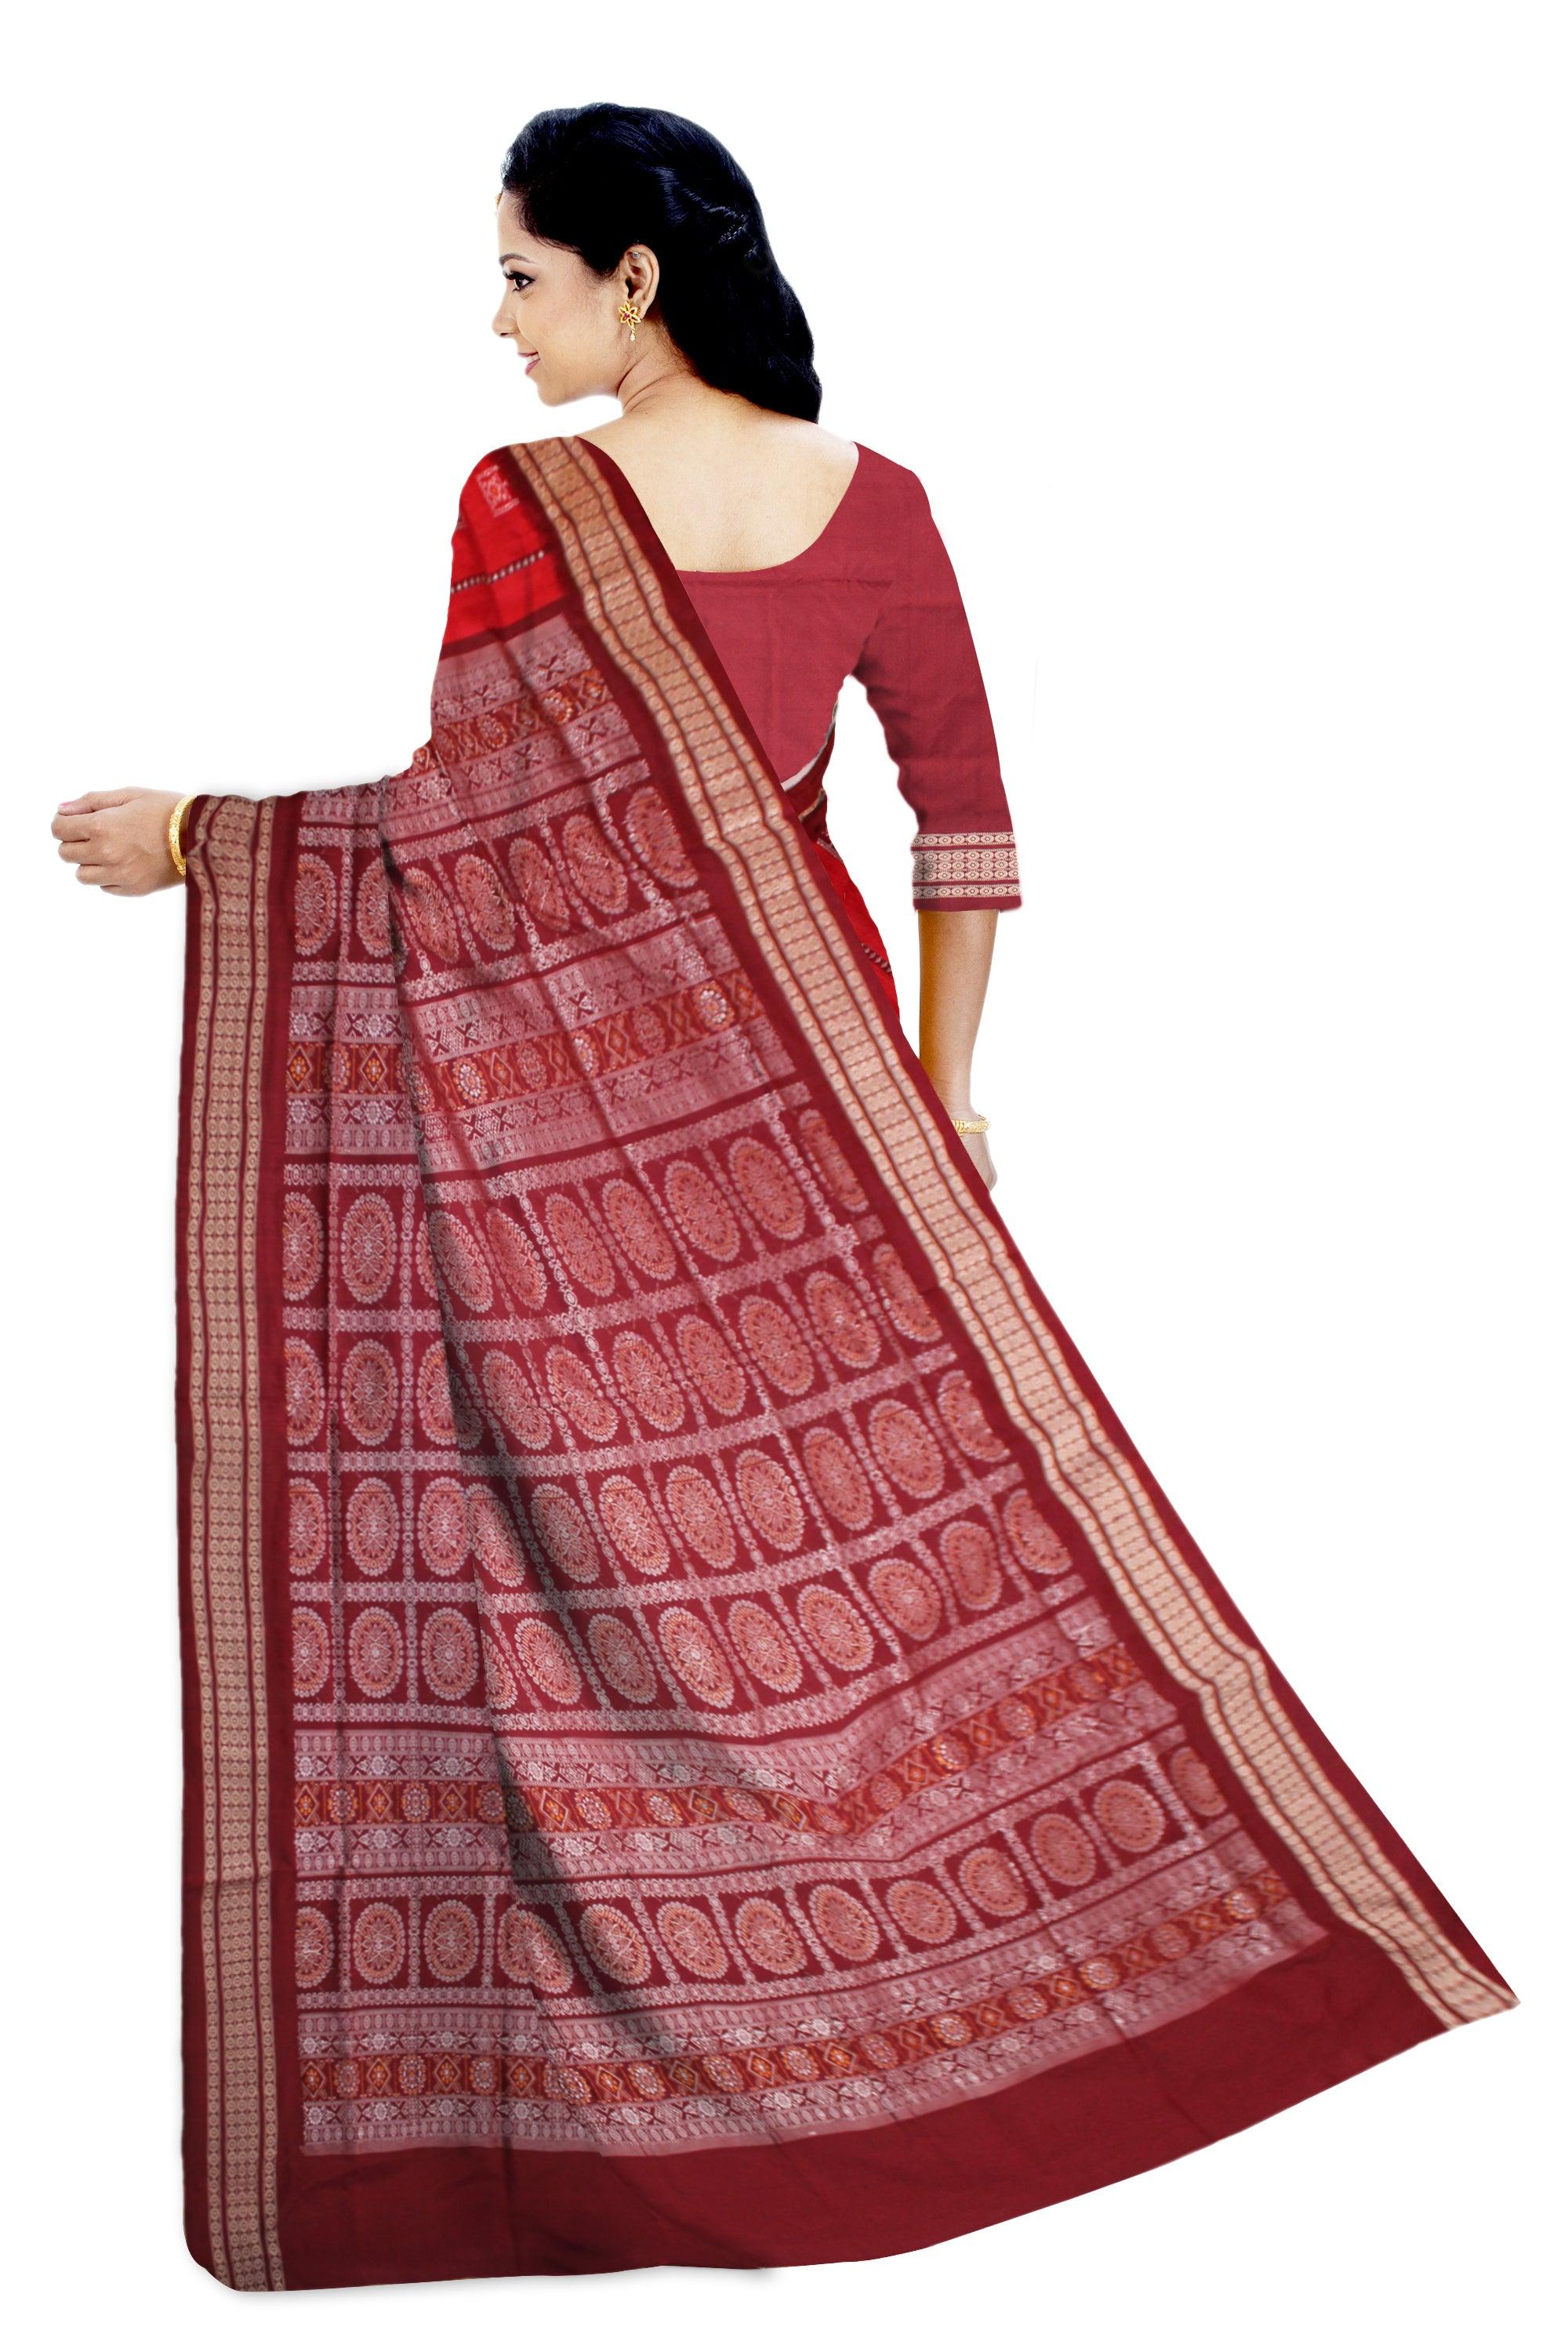 NEW DESIGN BANDHA SAREE IN RED AND MAROON COLOR MIX PATA, WITH BLOUSE PIECE - Koshali Arts & Crafts Enterprise